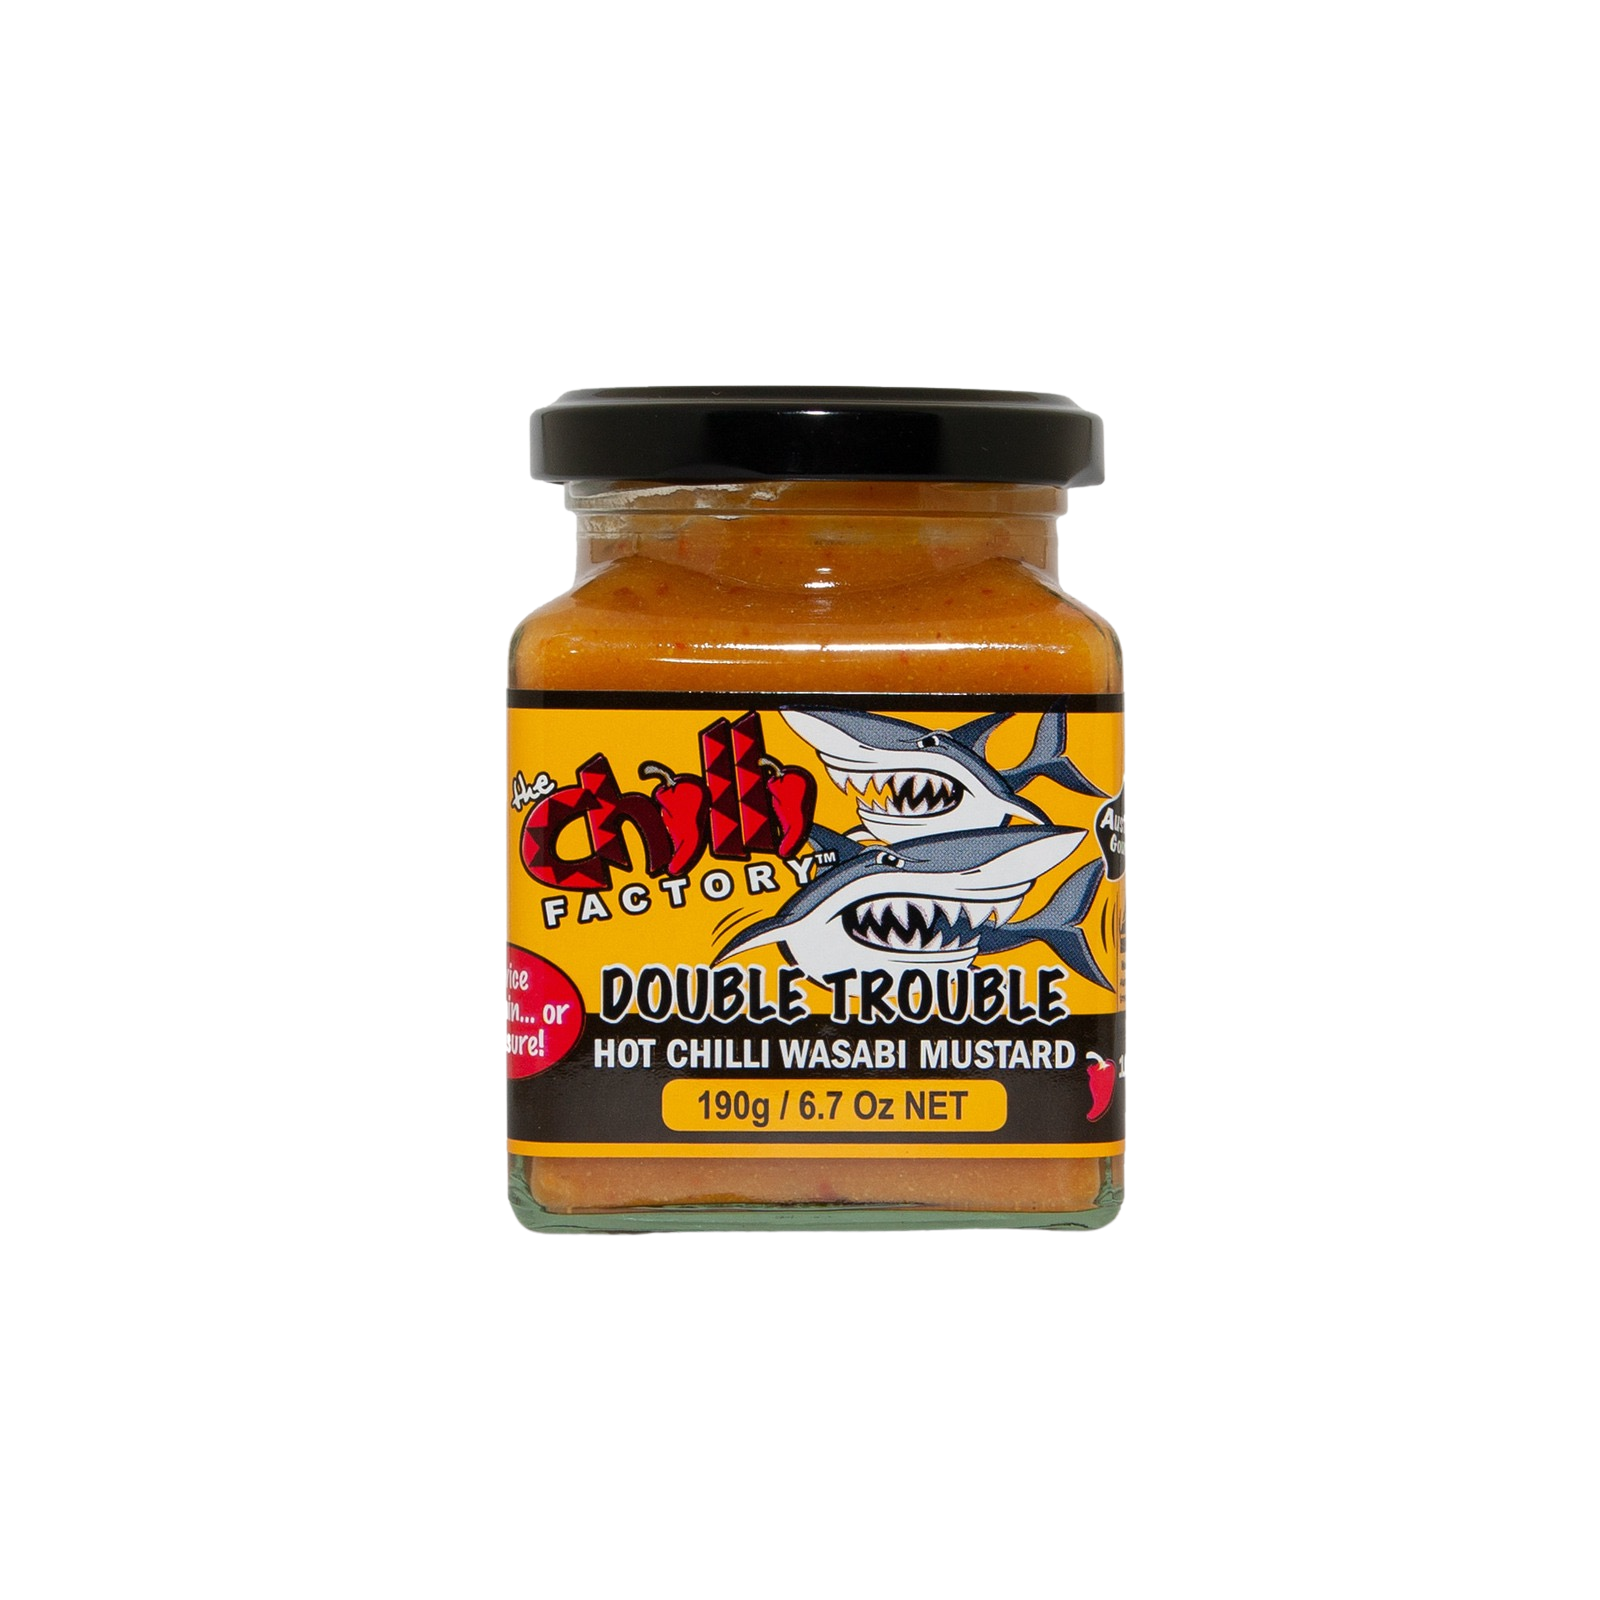 https://www.thechillifactory.com/chilli-sauce/double-trouble